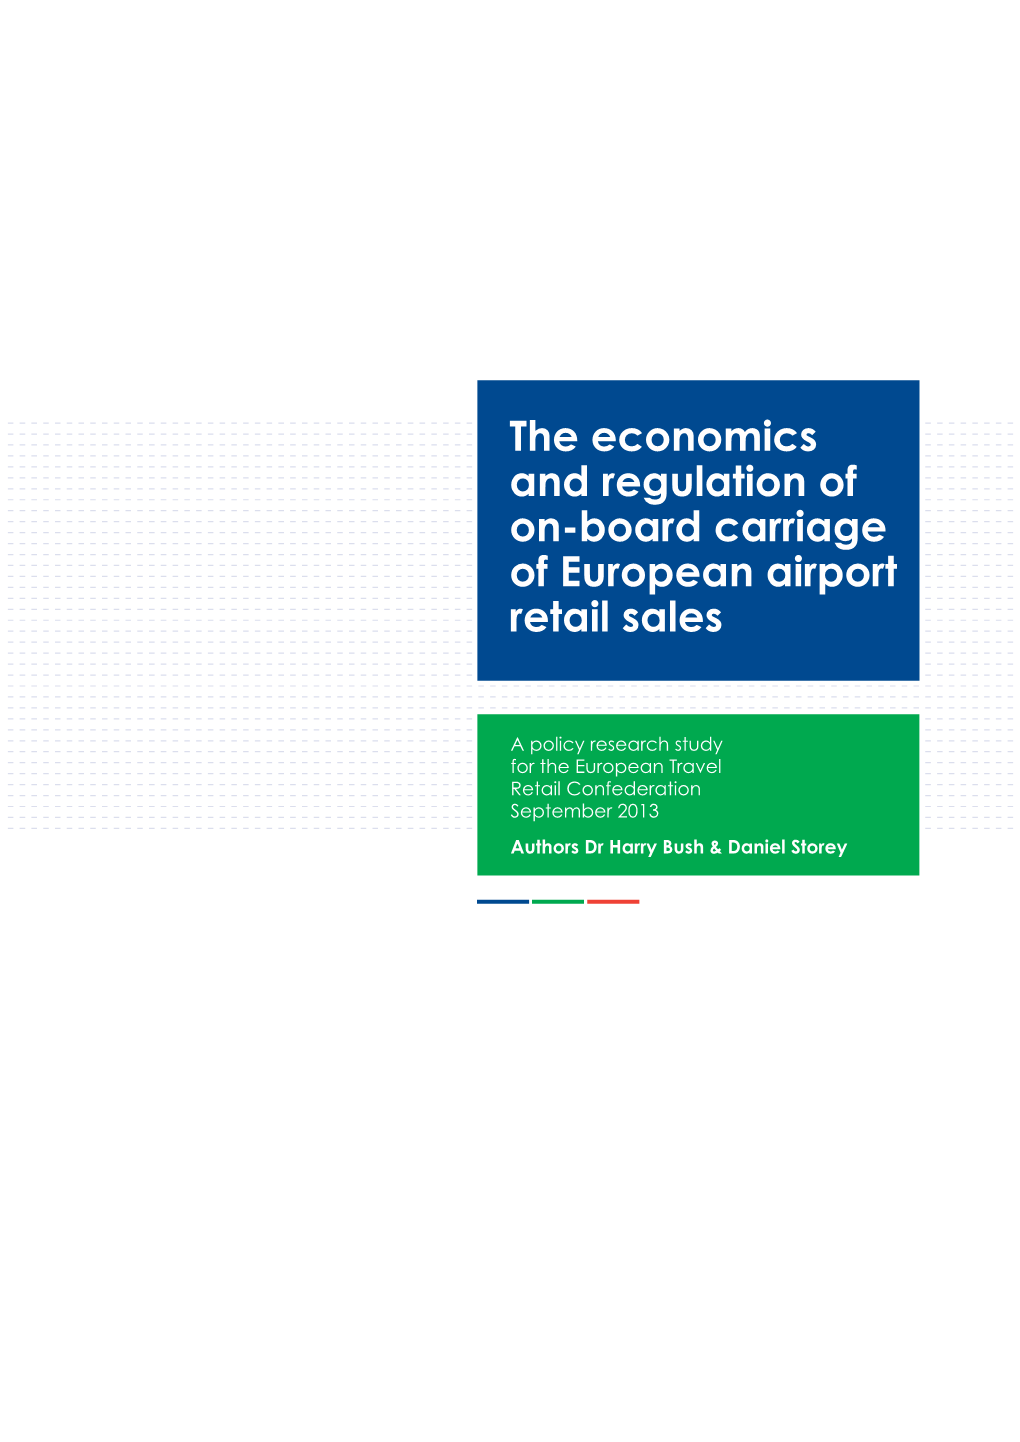 The Economics and Regulation of On-Board Carriage of European